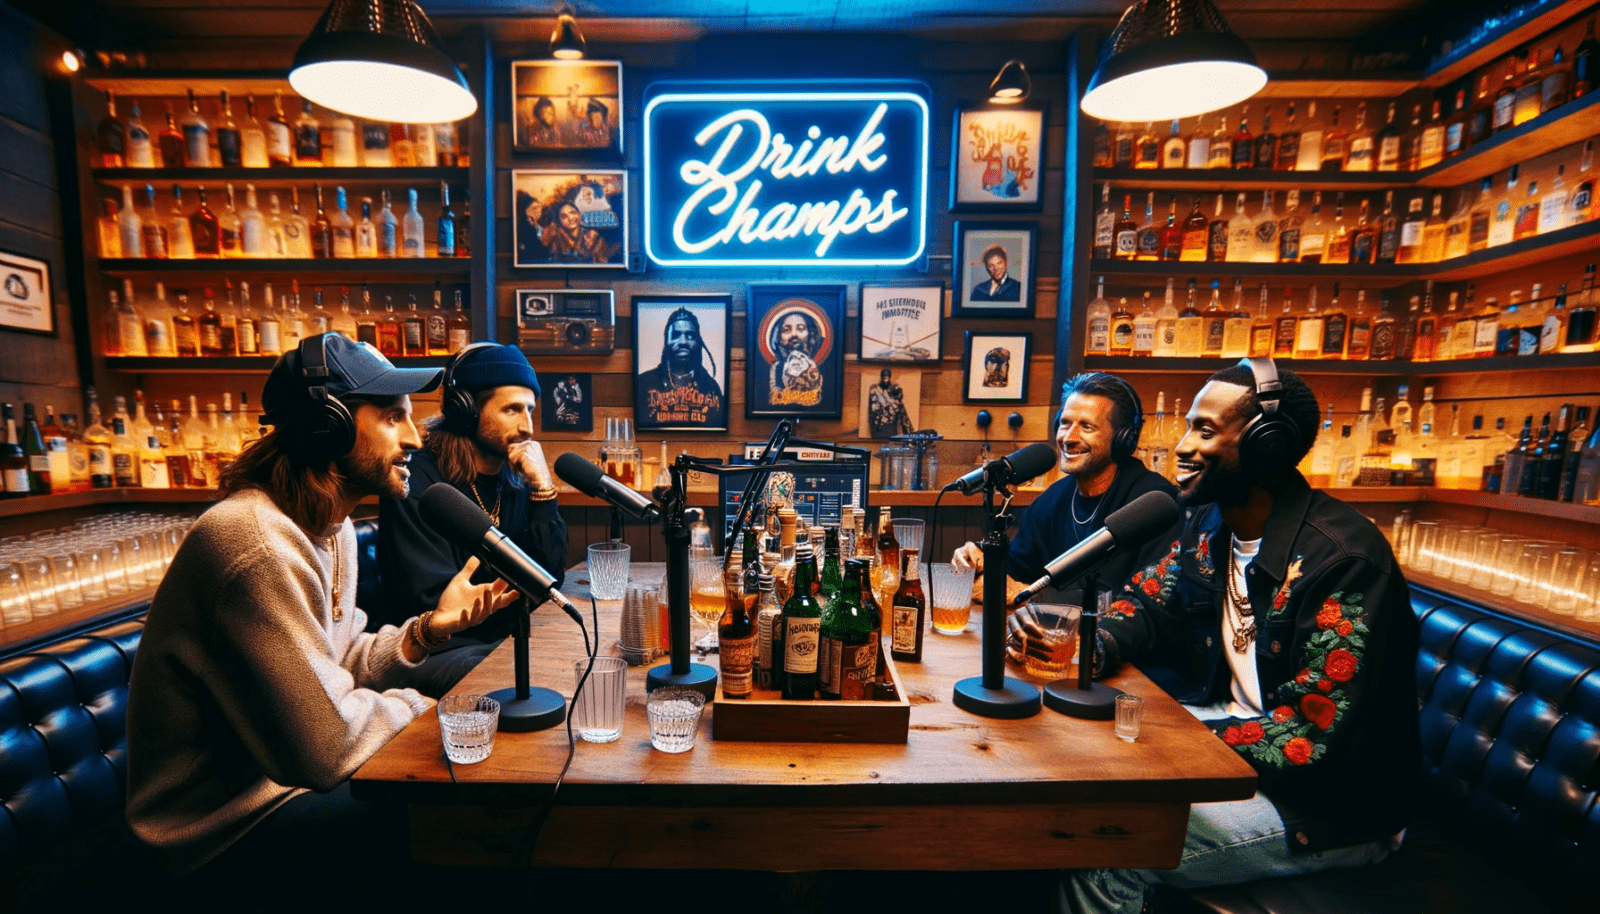 drink champs: happy hour episode 4